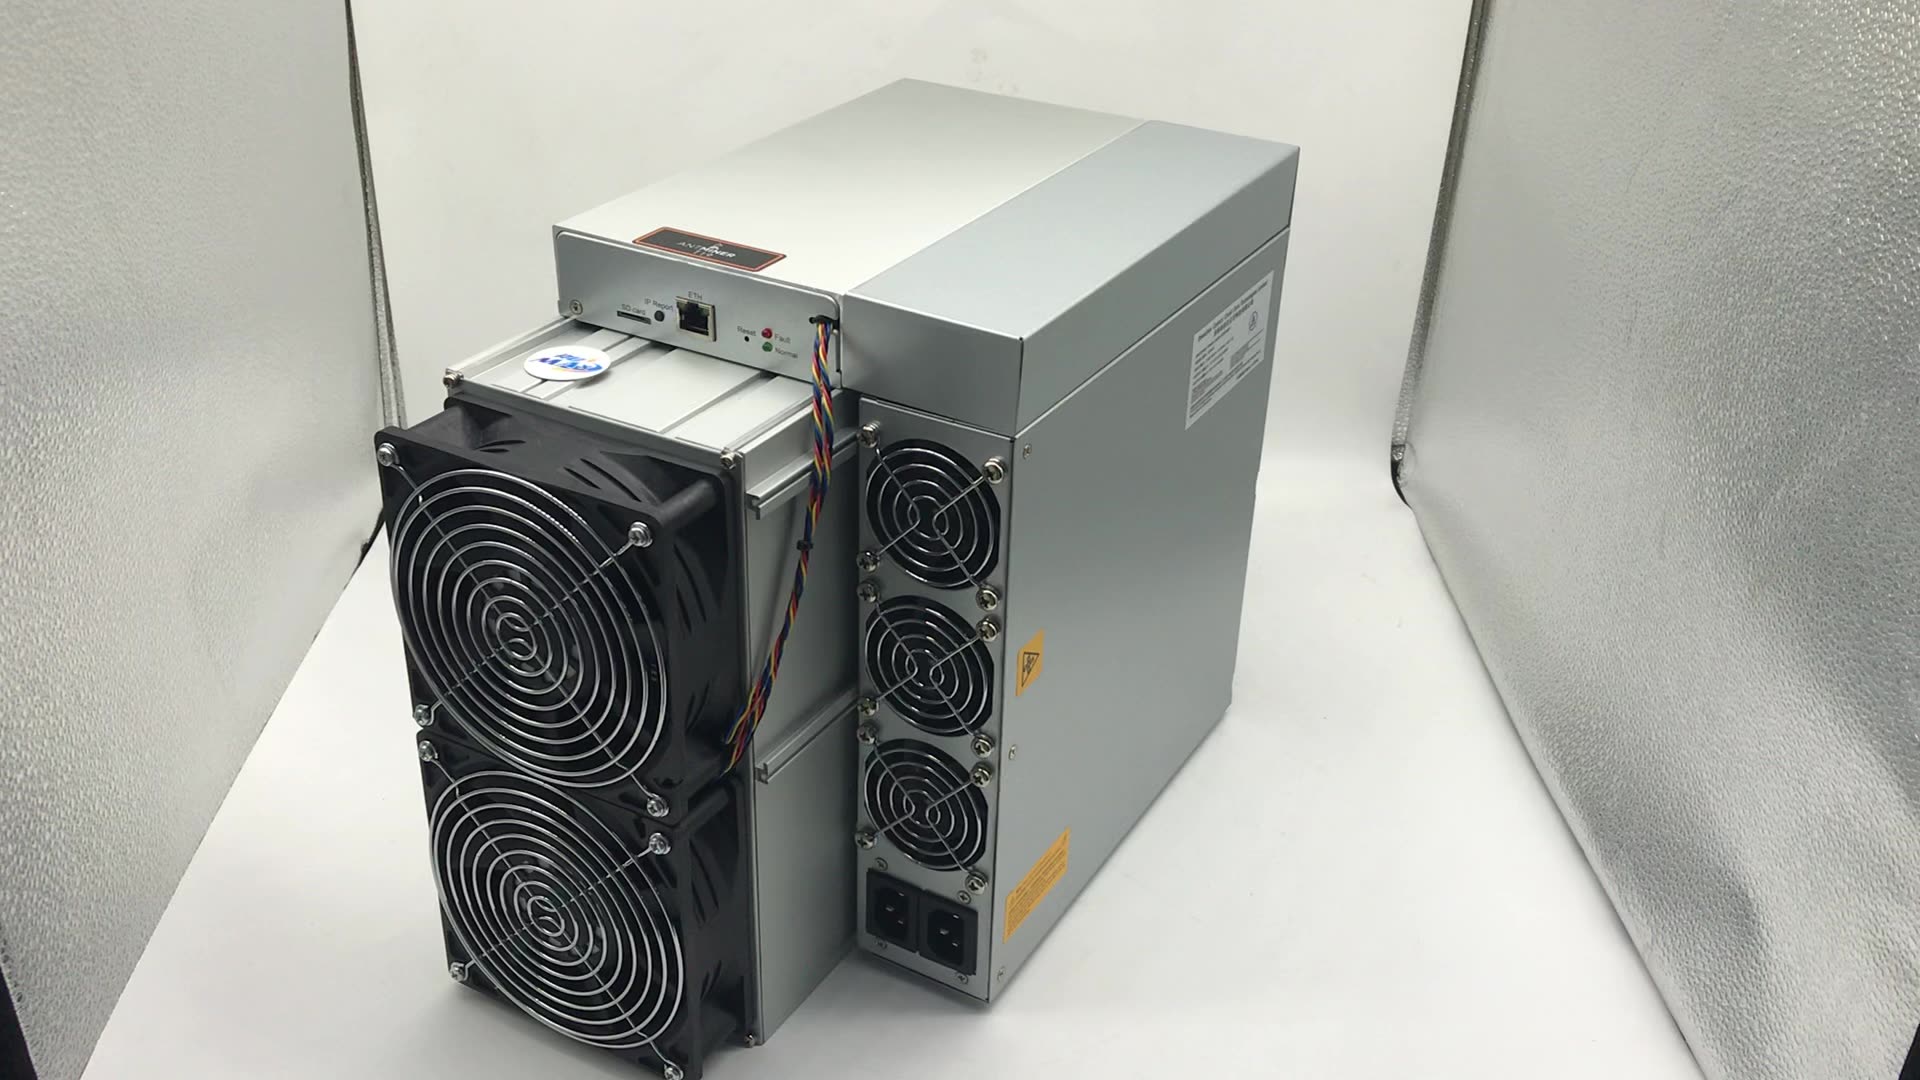 Antminer t21 190 th s. Antminer l7 9500mh/s. Antminer t19. S19j Pro 100th Antminer. Асик s19 Pro.